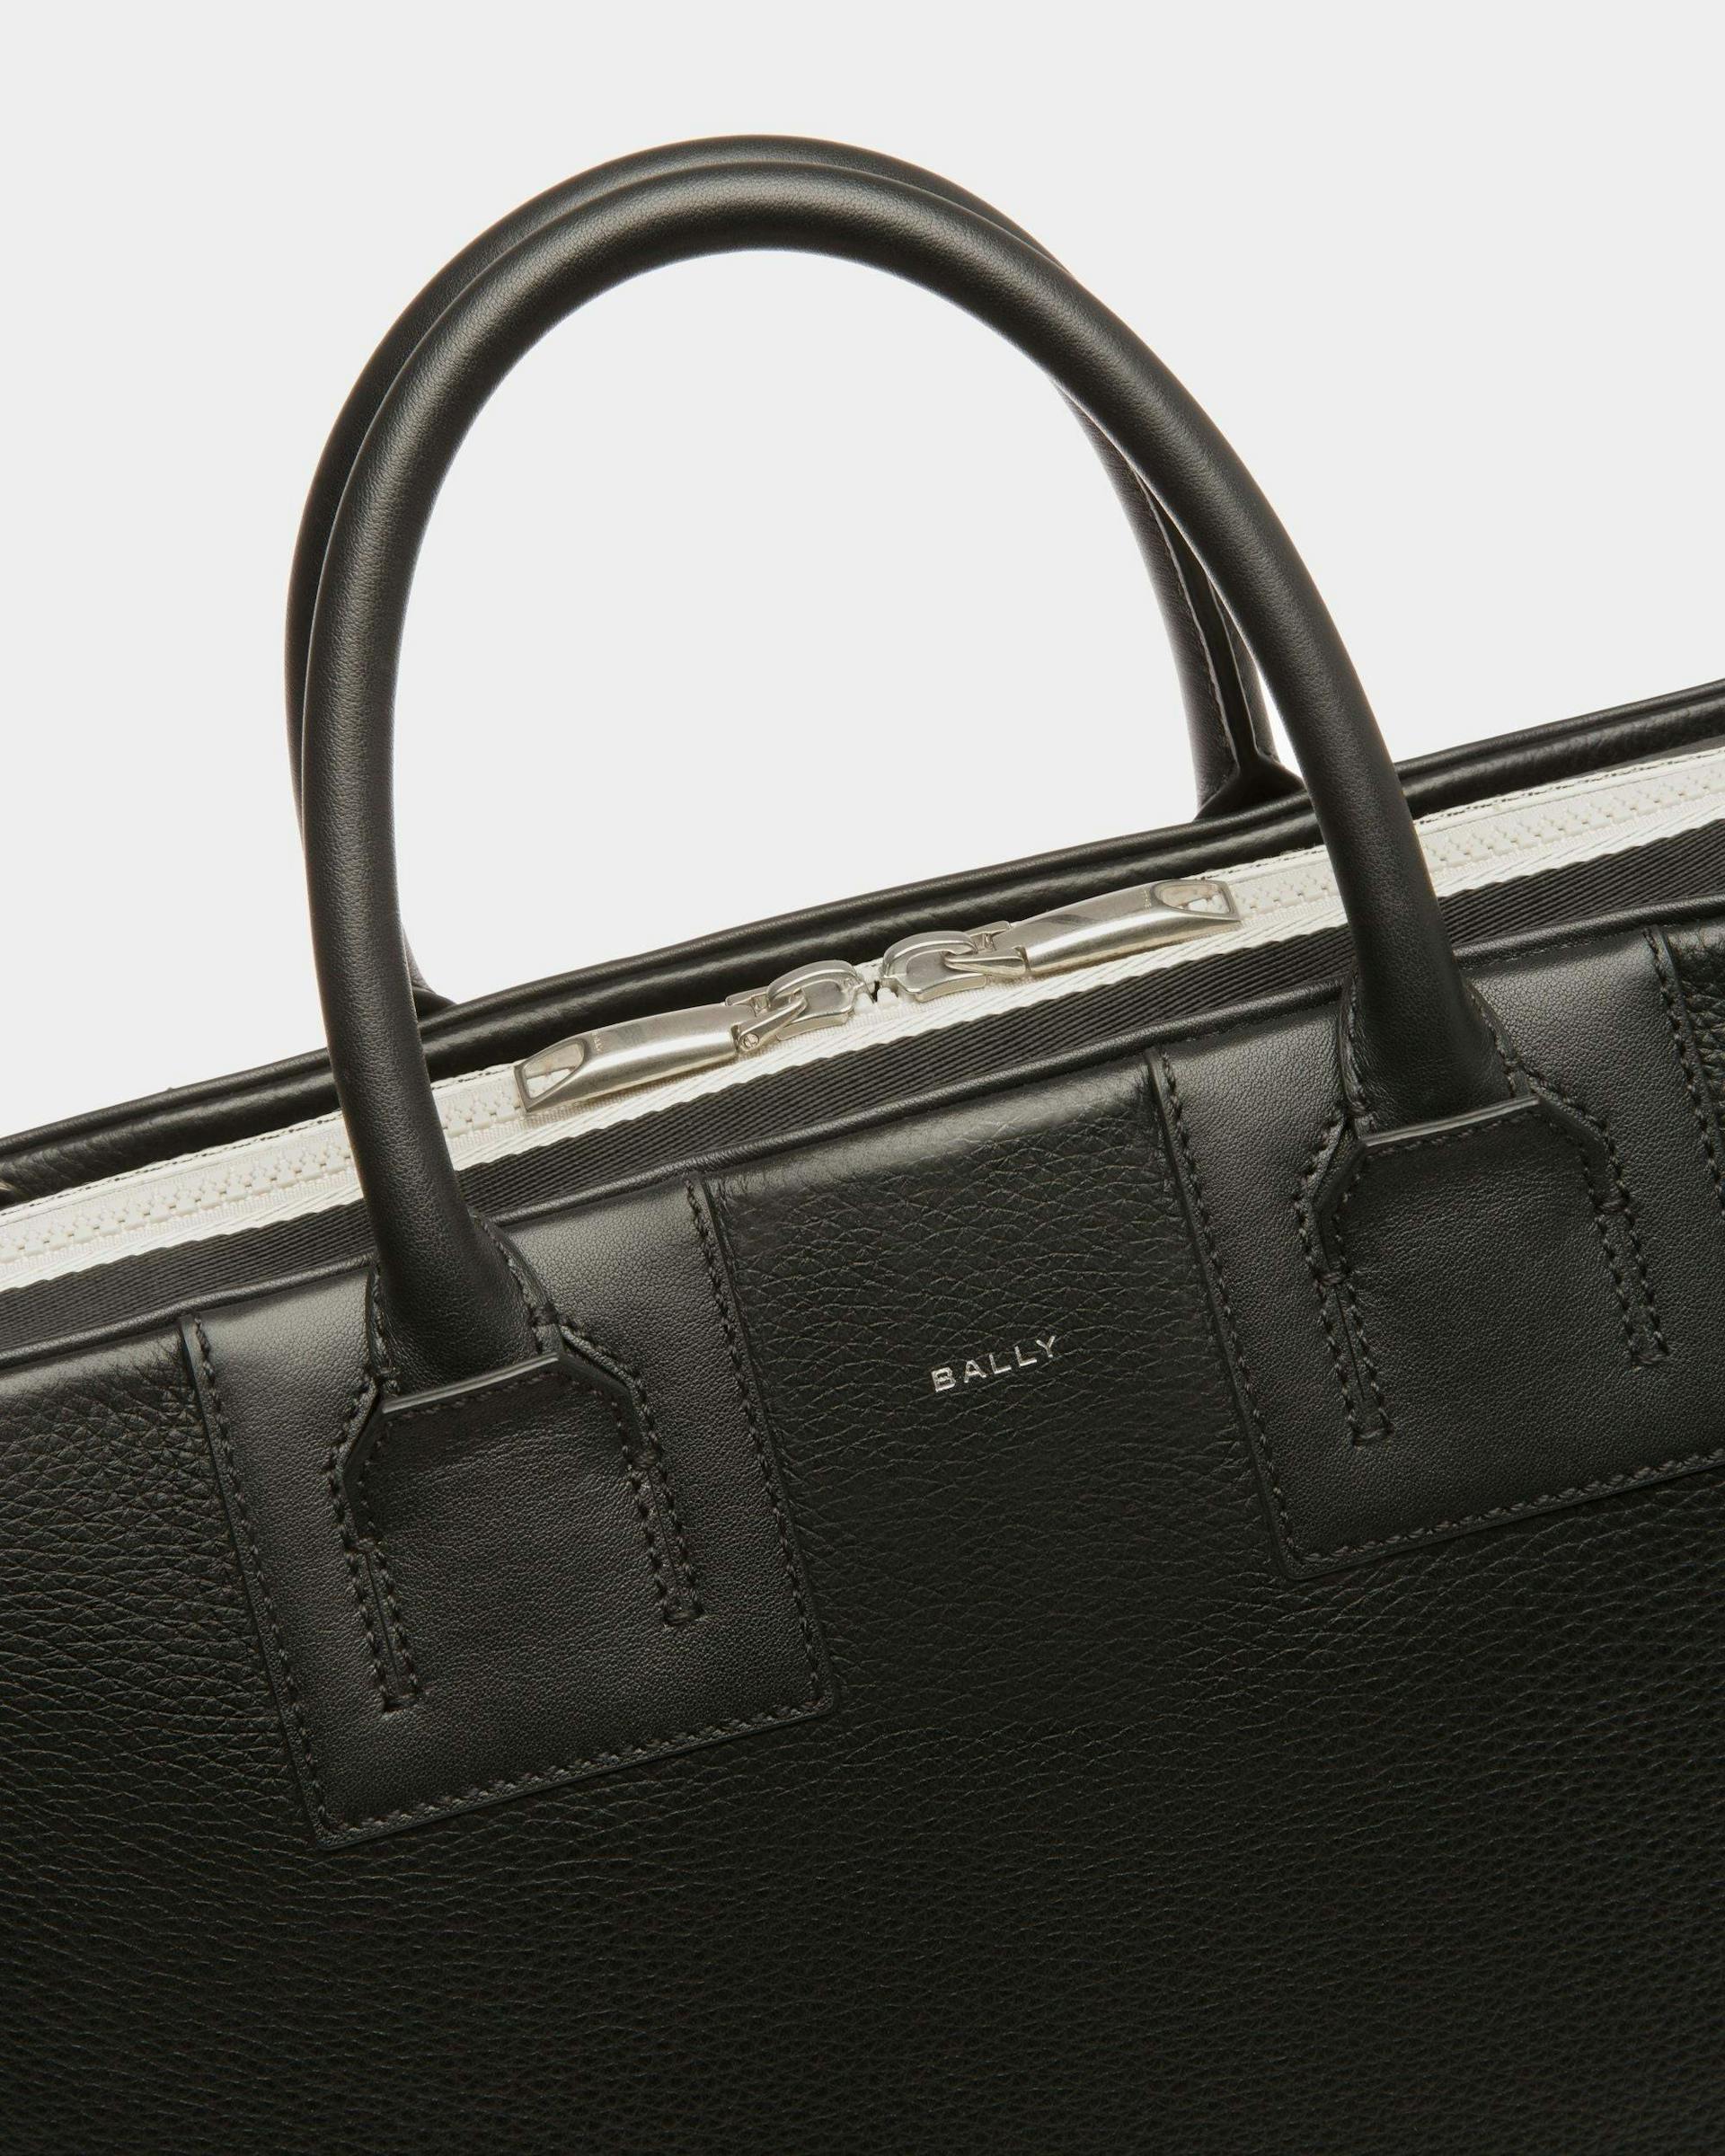 Men's Ribbon Briefcase In Black Leather | Bally | Still Life Detail